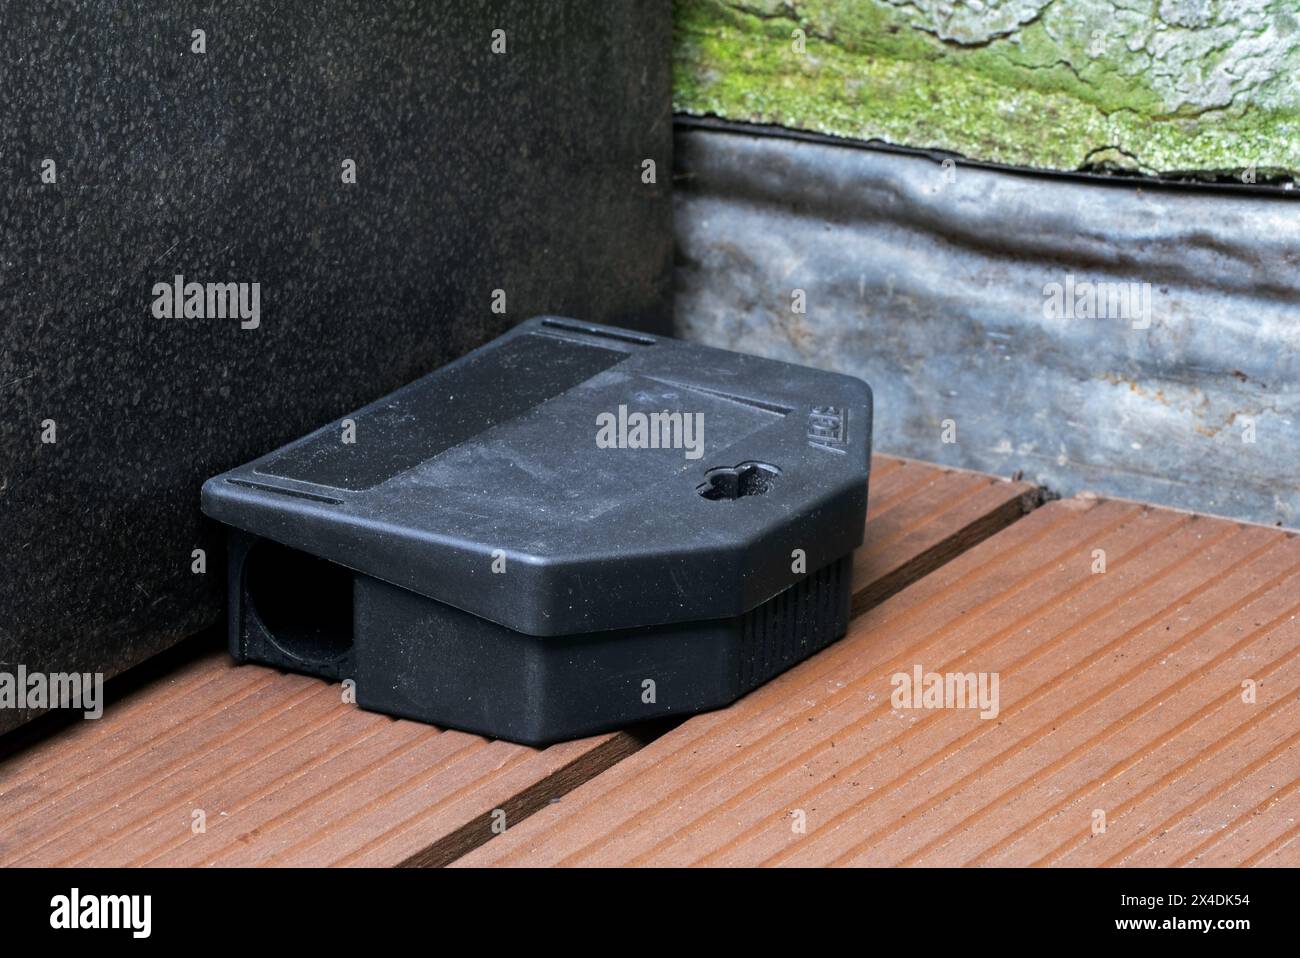 Poisoned plastic box for pest control, mouse bait station filled with rodenticide, poisonous paste as poison to exterminate mice in and around house Stock Photo